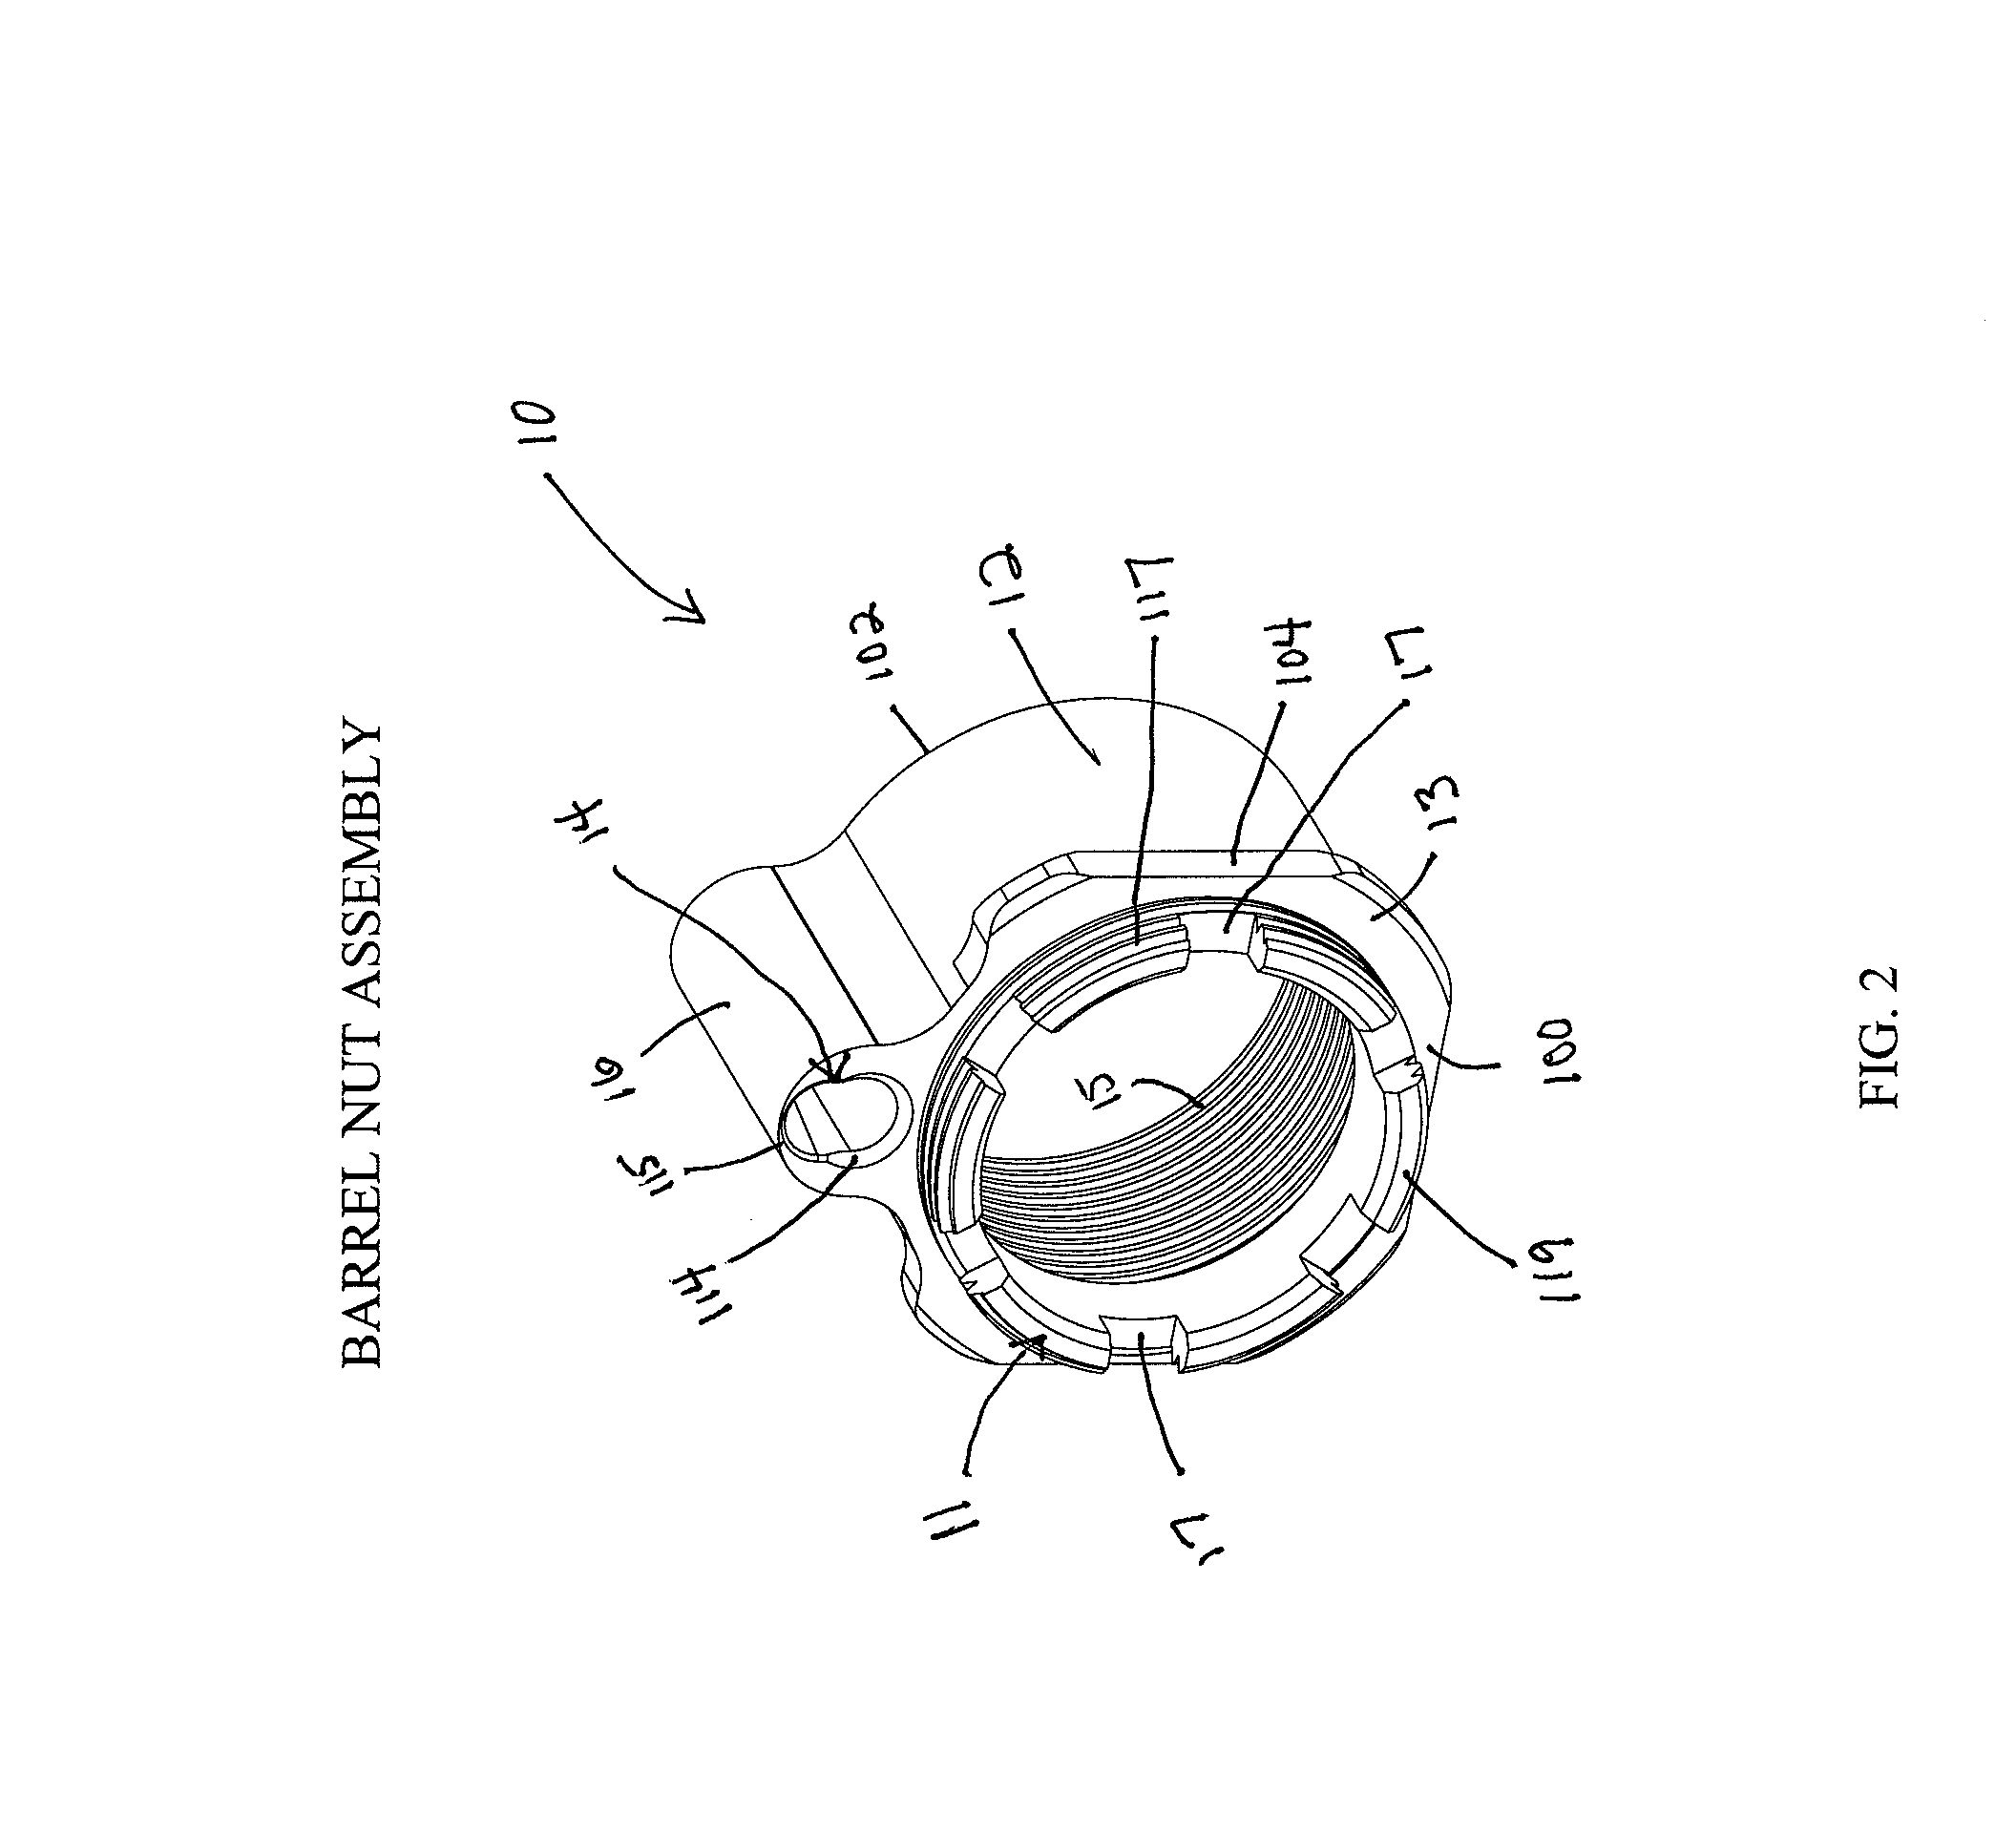 Barrel nut assembly and method to attach a barrel to a firearm using such assembly